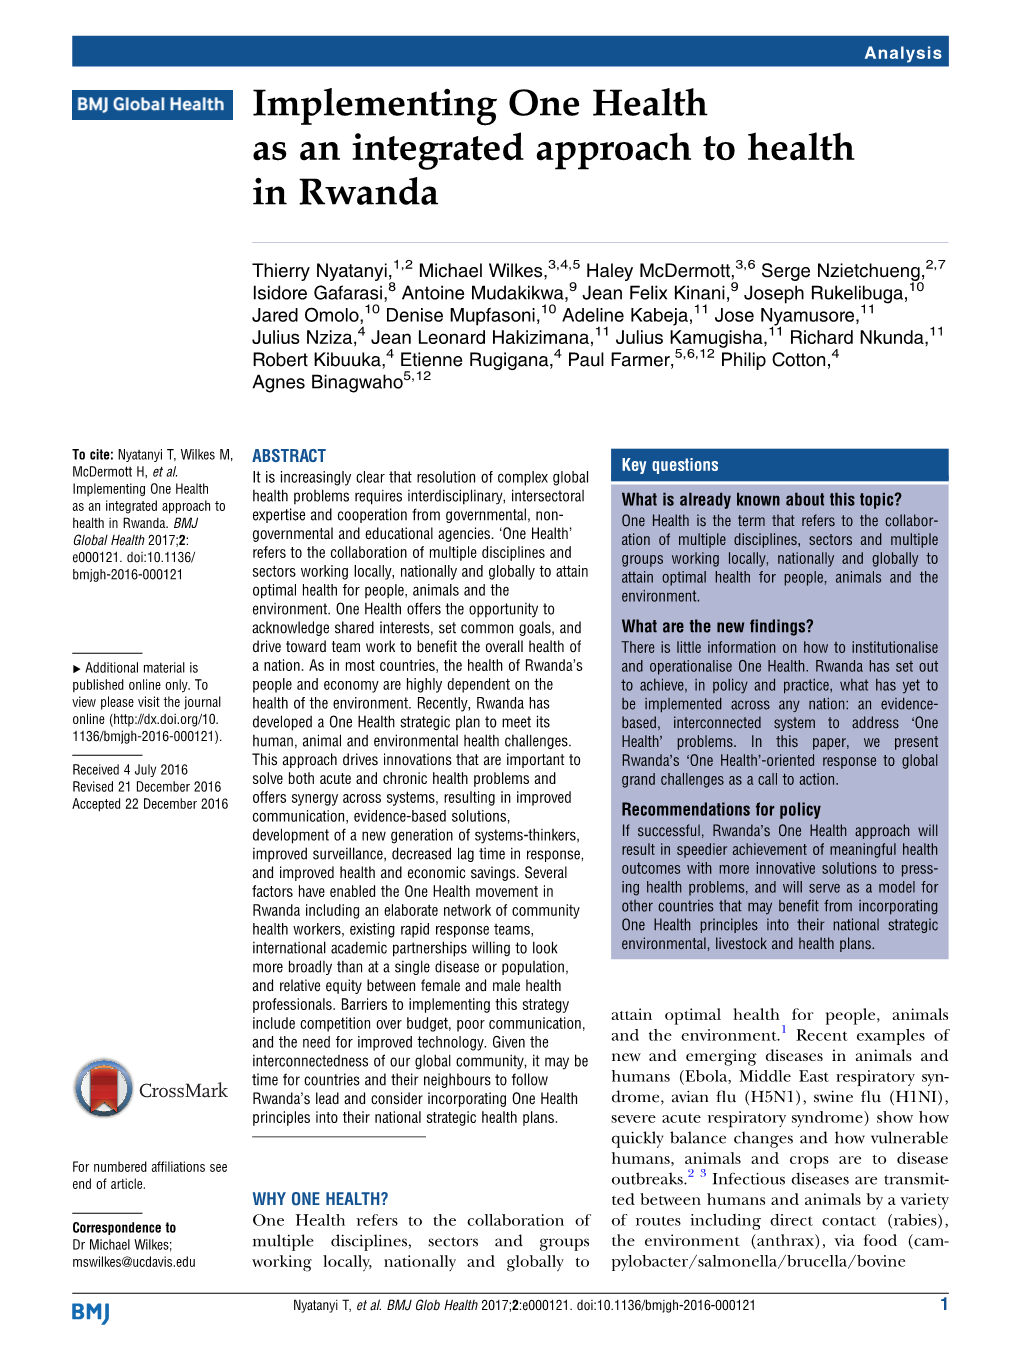 Implementing One Health As an Integrated Approach to Health in Rwanda